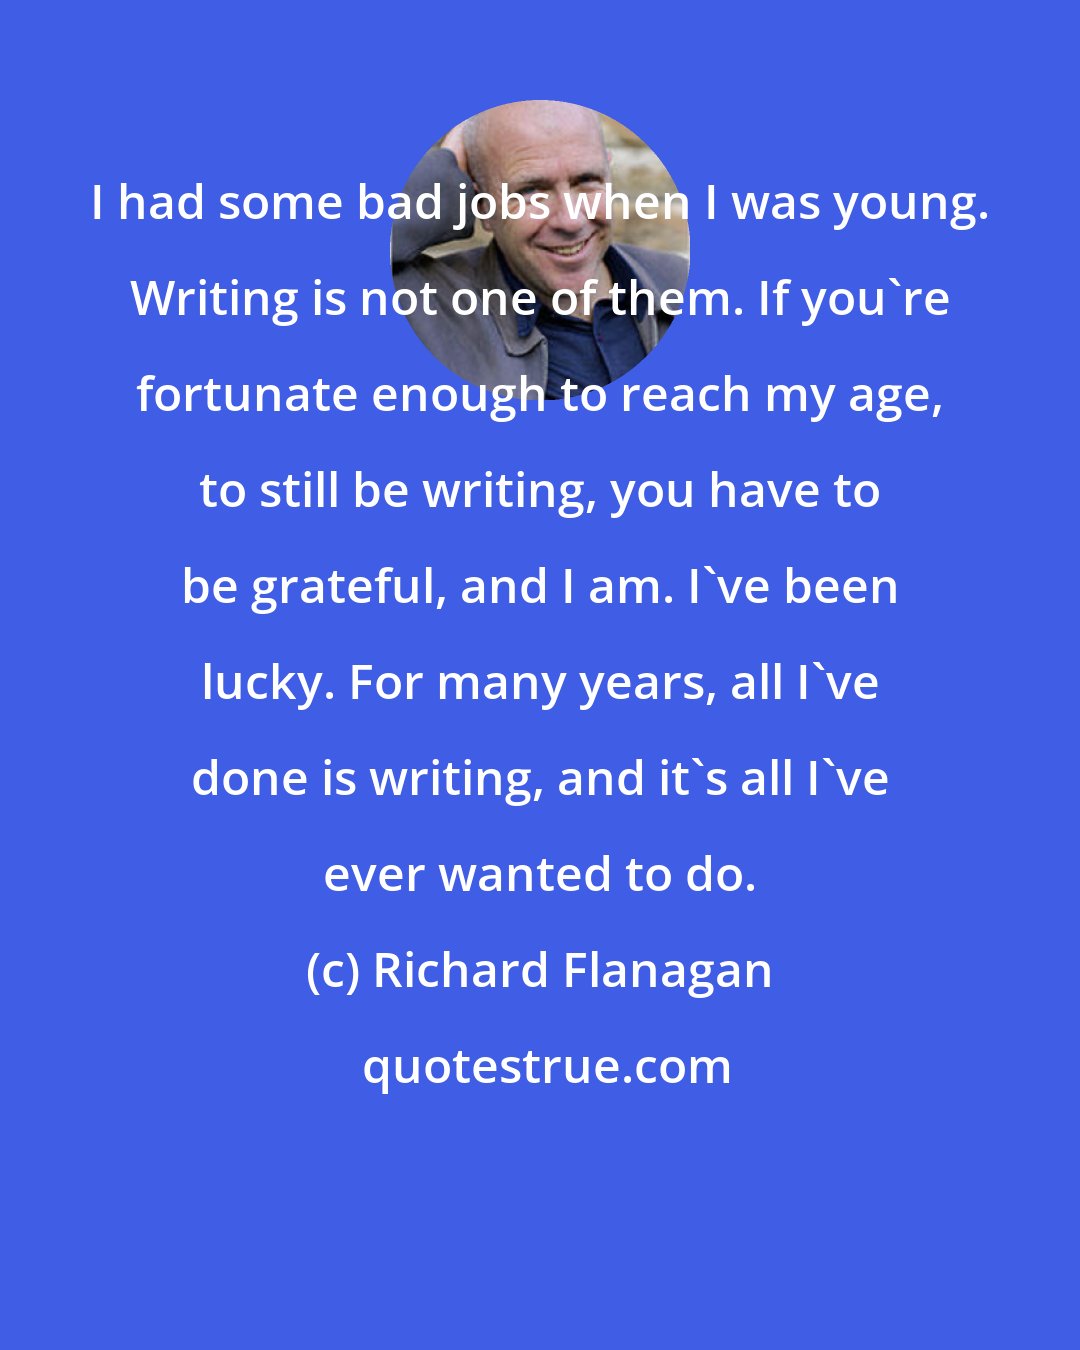 Richard Flanagan: I had some bad jobs when I was young. Writing is not one of them. If you're fortunate enough to reach my age, to still be writing, you have to be grateful, and I am. I've been lucky. For many years, all I've done is writing, and it's all I've ever wanted to do.